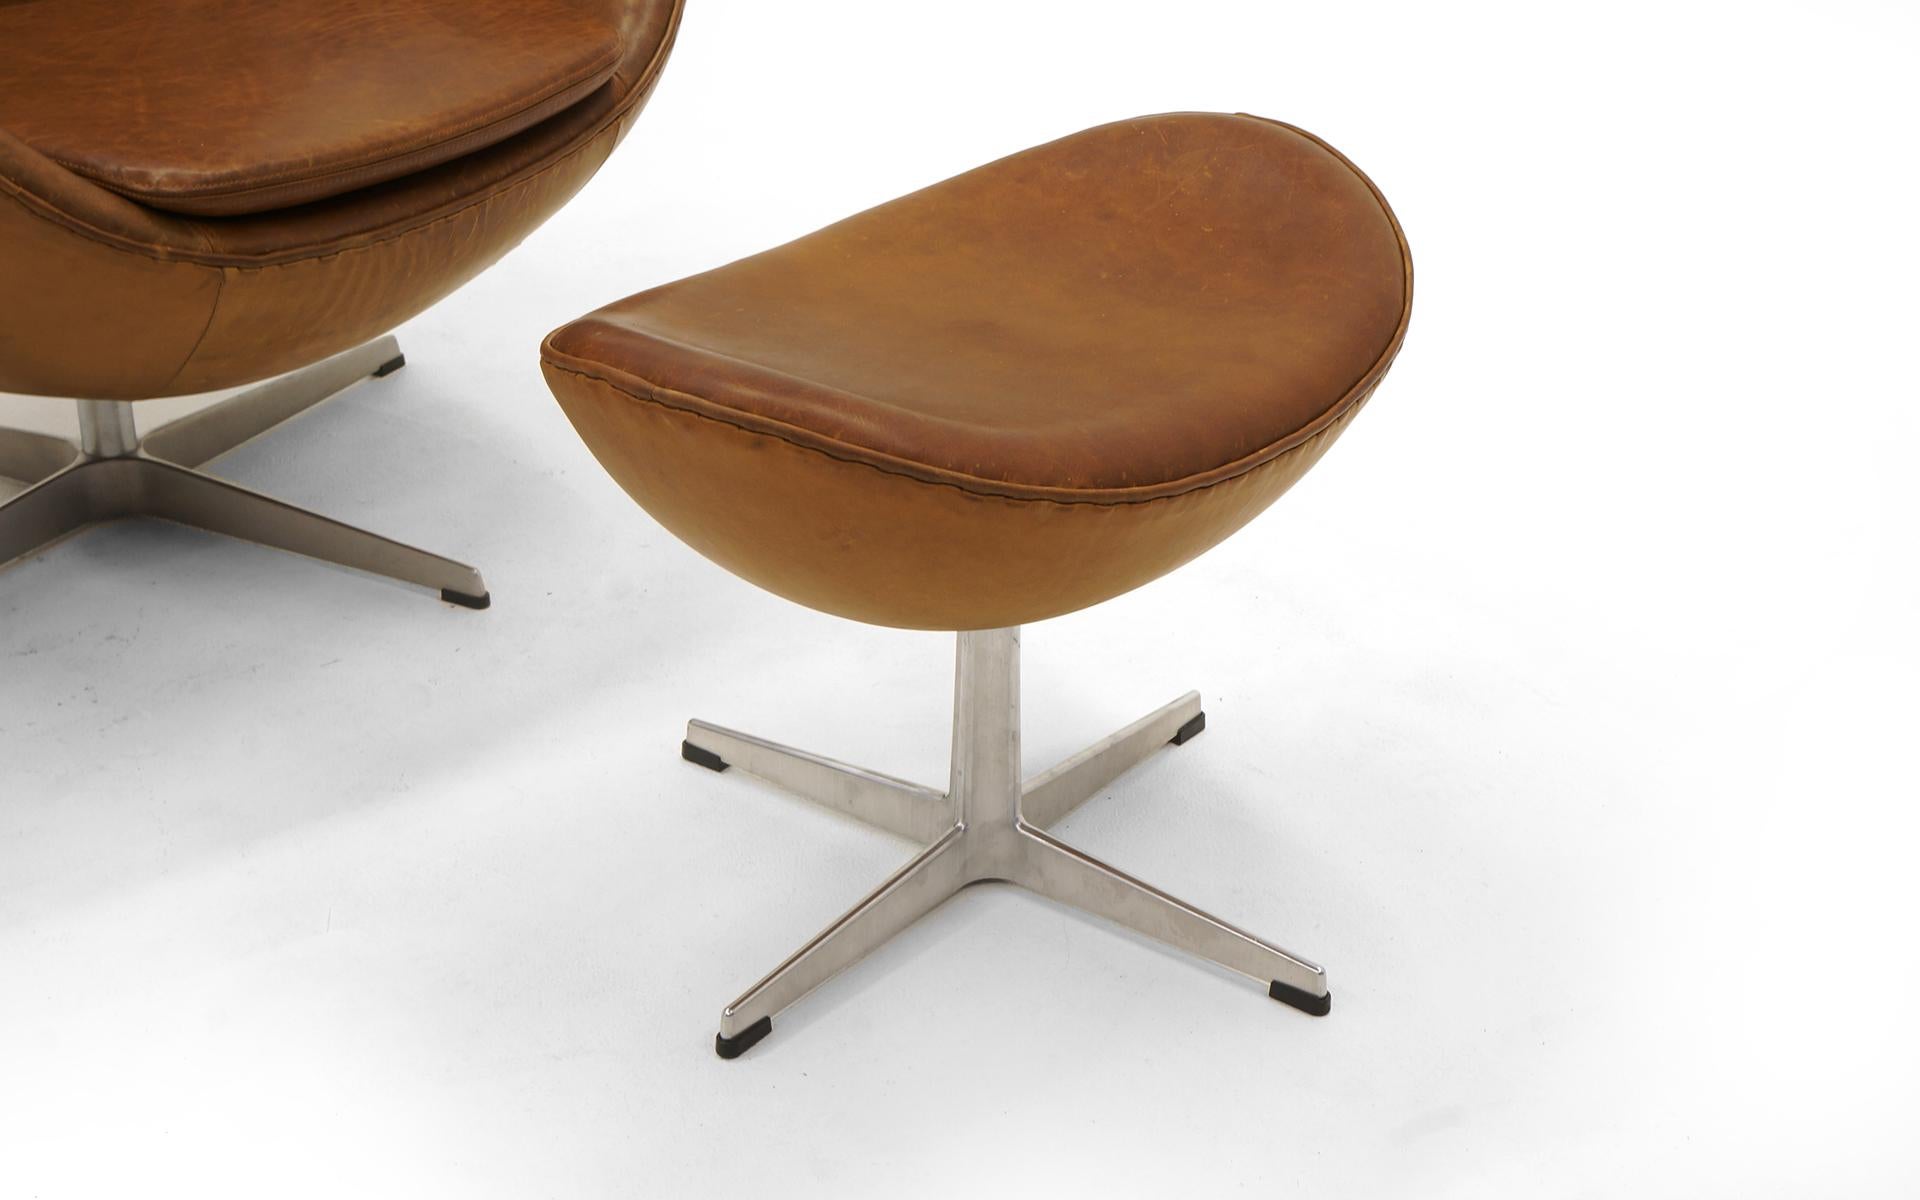 Mid-Century Modern Pair Arne Jacobsen Egg Chairs with Ottomans, Cognac Leather. Price is for all.